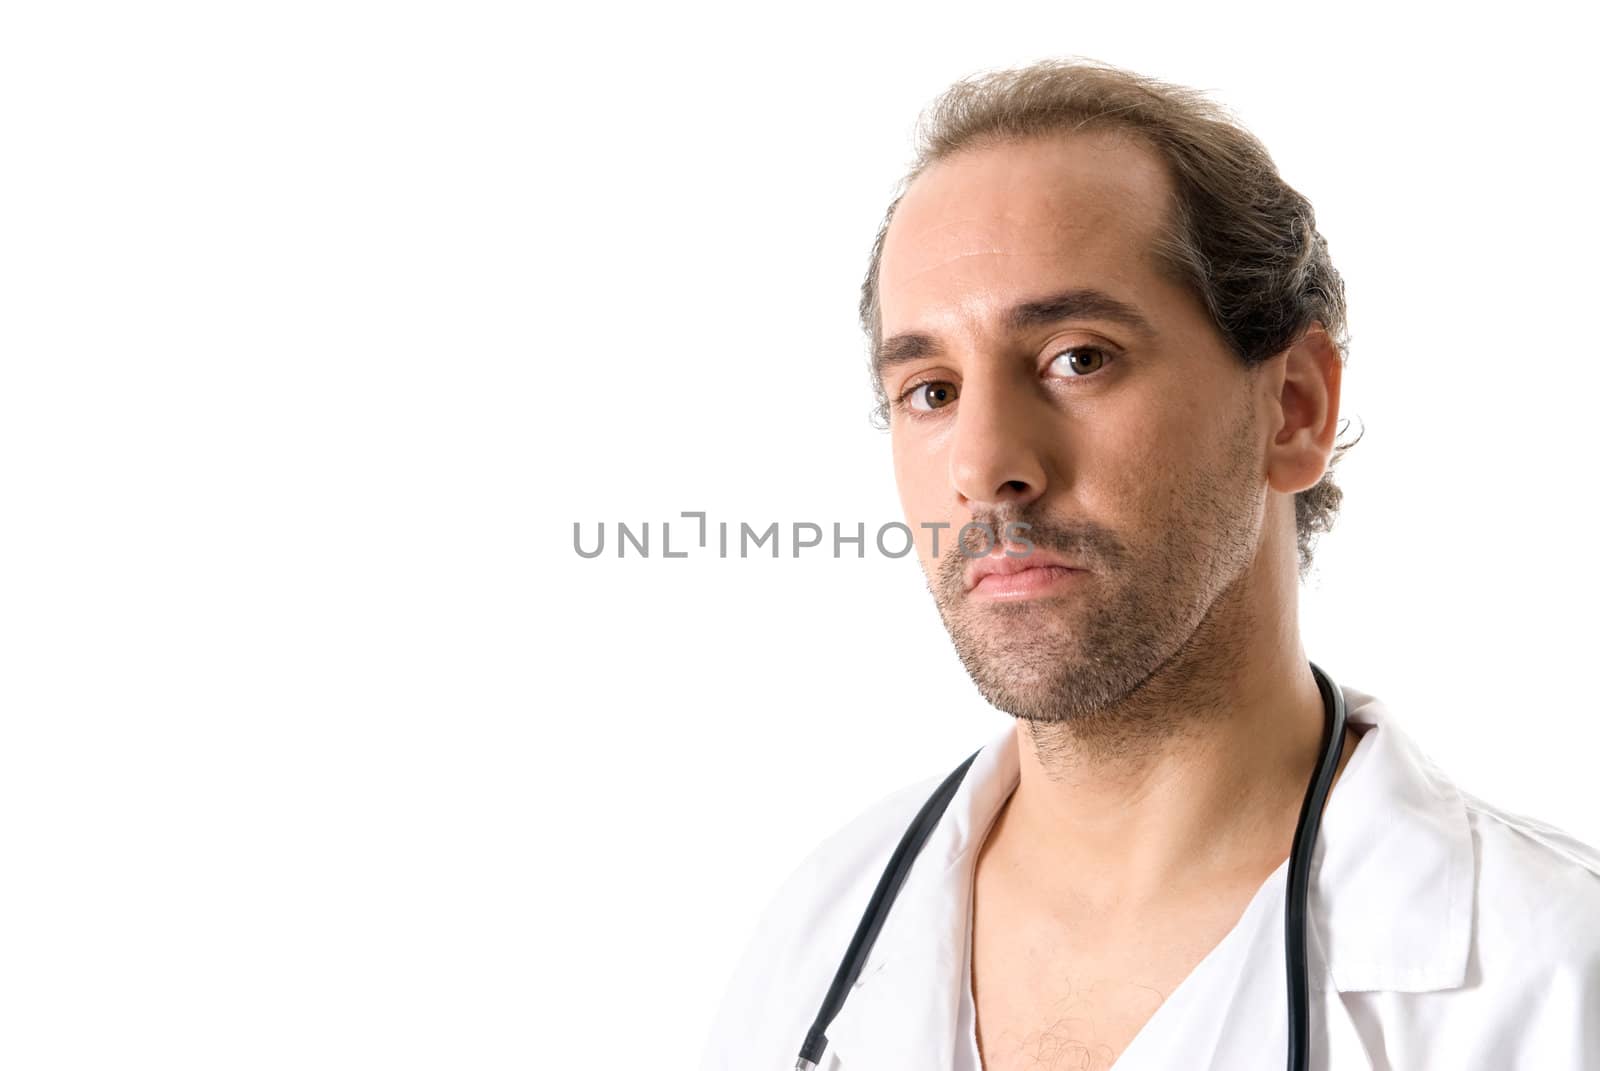 Doctor with stethoscope on white background. 